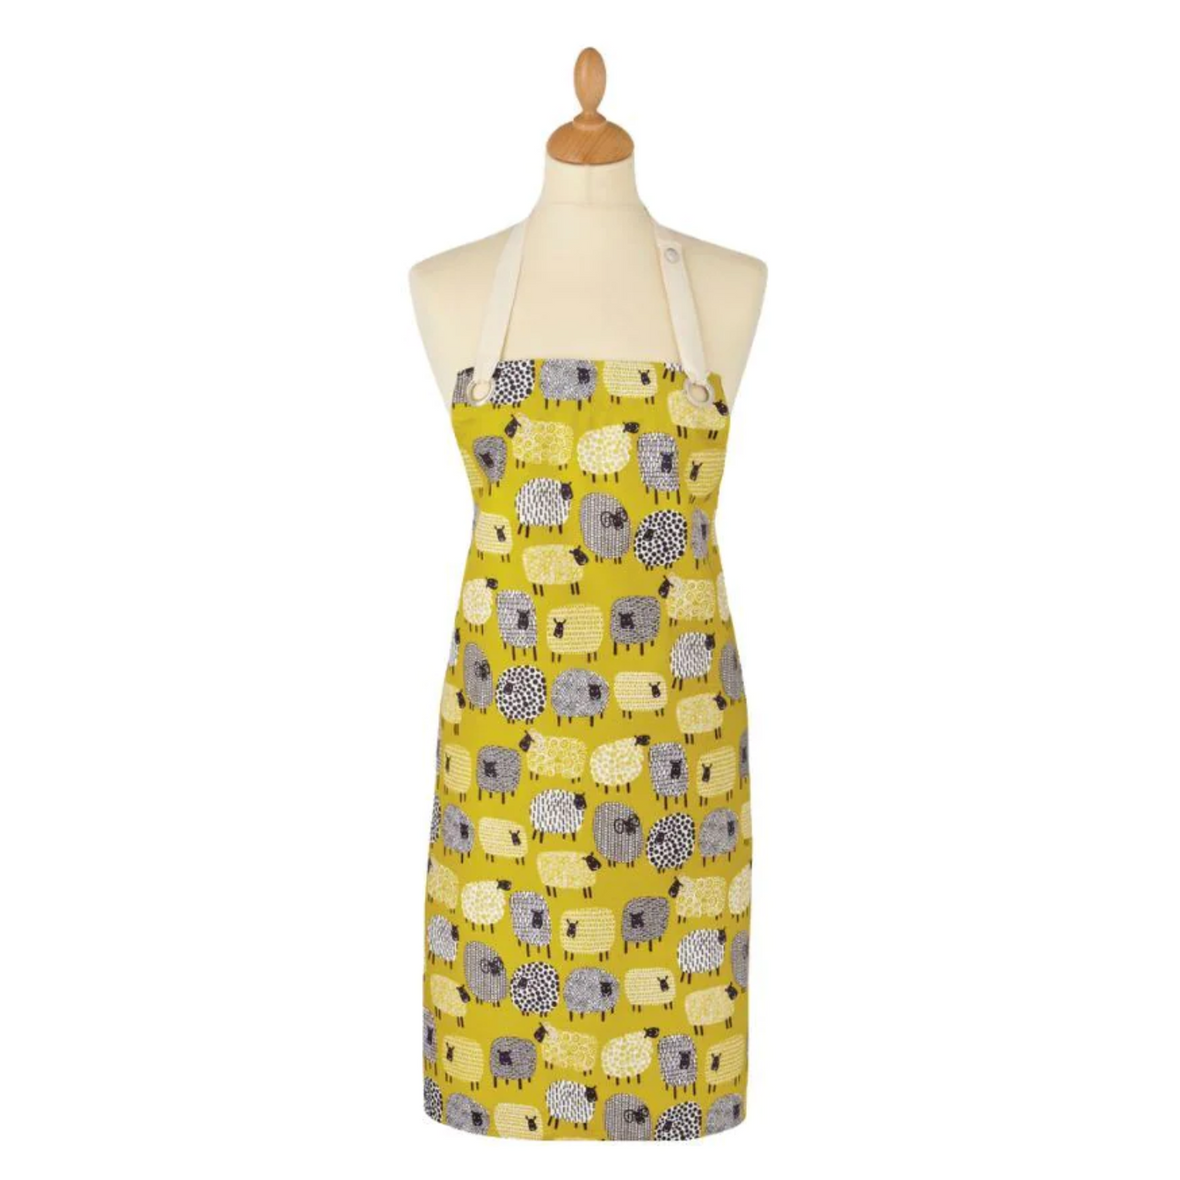 Ulster Weavers Dotty Sheep Biodegradable Oil Cloth Apron